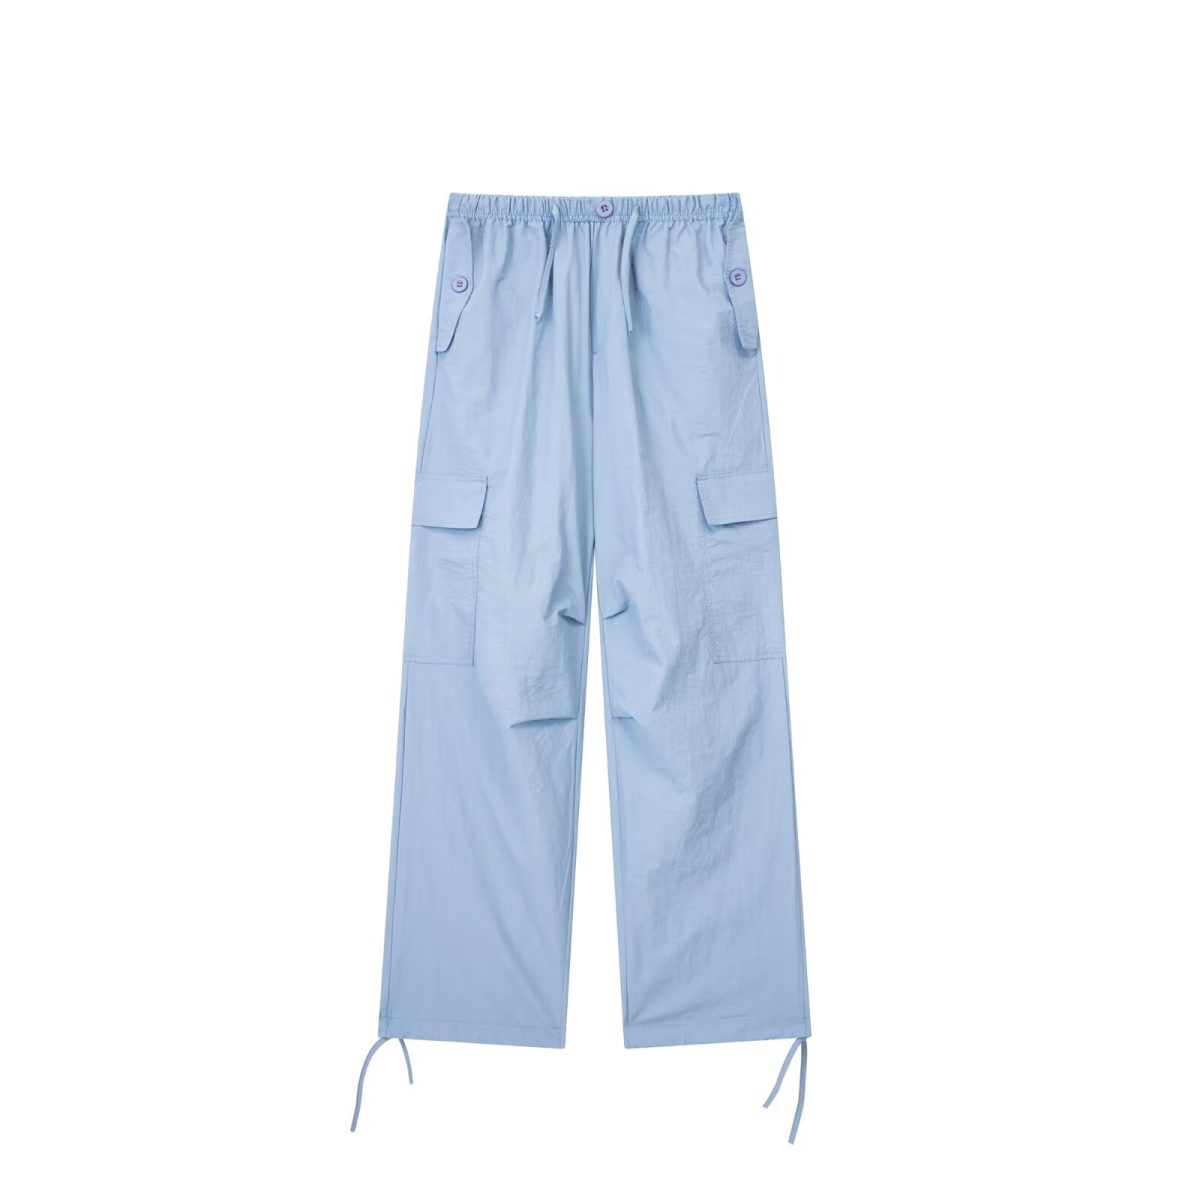 Comfortable Loose Cotton Cargo Sports Pants in Pants